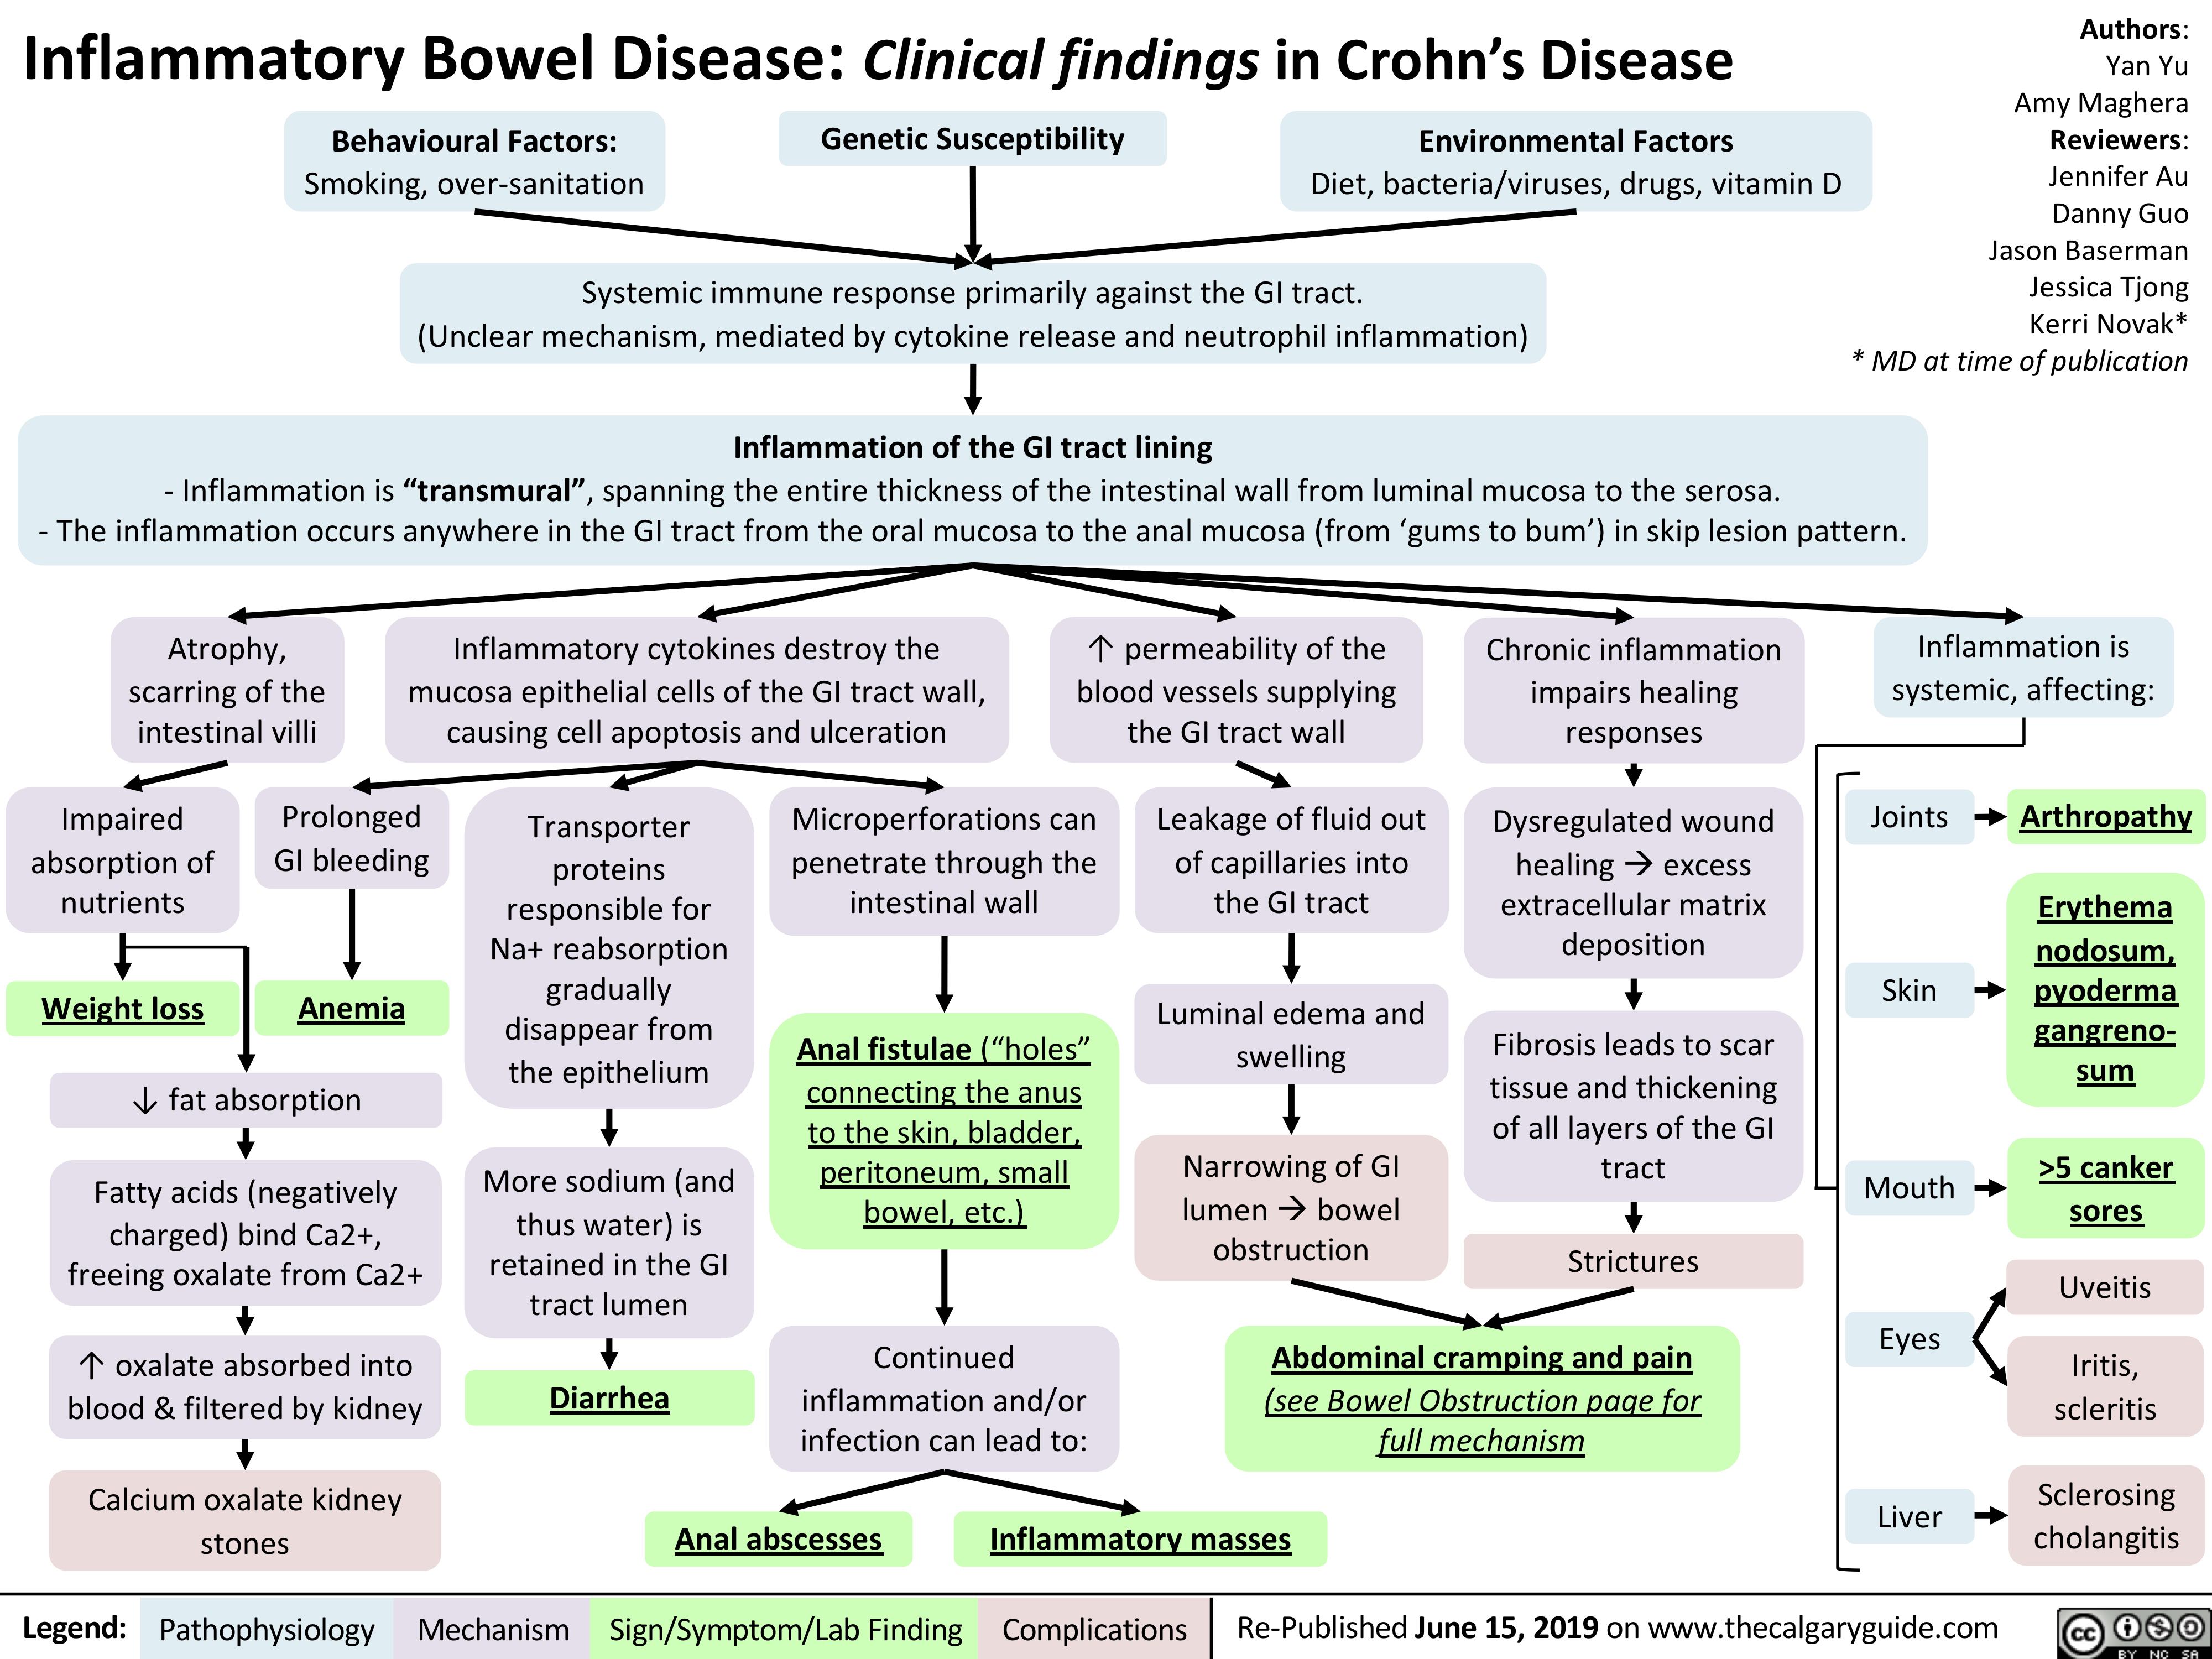 Inflammatory Bowel Disease: Clinical findings in Crohn’s Disease
Authors: Yan Yu Amy Maghera Reviewers: Jennifer Au Danny Guo Jason Baserman Jessica Tjong Kerri Novak* * MD at time of publication
   Behavioural Factors:
Smoking, over-sanitation
Genetic Susceptibility
Environmental Factors
Diet, bacteria/viruses, drugs, vitamin D
    Systemic immune response primarily against the GI tract.
(Unclear mechanism, mediated by cytokine release and neutrophil inflammation)
  Inflammation of the GI tract lining
- Inflammation is “transmural”, spanning the entire thickness of the intestinal wall from luminal mucosa to the serosa.
- The inflammation occurs anywhere in the GI tract from the oral mucosa to the anal mucosa (from ‘gums to bum’) in skip lesion pattern.
       Atrophy, scarring of the intestinal villi
Inflammatory cytokines destroy the mucosa epithelial cells of the GI tract wall, causing cell apoptosis and ulceration
↑ permeability of the blood vessels supplying the GI tract wall
Chronic inflammation impairs healing responses
Dysregulated wound healingàexcess
extracellular matrix deposition
Fibrosis leads to scar tissue and thickening of all layers of the GI tract
Strictures
Inflammation is systemic, affecting:
Joints         Arthropathy Erythema
            Impaired absorption of nutrients
Weight loss
Prolonged GI bleeding
Anemia
Transporter proteins responsible for Na+ reabsorption gradually disappear from the epithelium
More sodium (and thus water) is
retained in the GI tract lumen
Microperforations can penetrate through the intestinal wall
Anal fistulae (“holes” connecting the anus to the skin, bladder, peritoneum, small bowel, etc.)
Continued inflammation and/or infection can lead to:
Leakage of fluid out of capillaries into the GI tract
Luminal edema and swelling
Narrowing of GI lumenàbowel obstruction
Skin
Mouth Eyes
Liver
nodosum, pyoderma gangreno- sum
>5 canker sores
Uveitis
Iritis, scleritis
Sclerosing cholangitis
                       ↓ fat absorption
Fatty acids (negatively charged) bind Ca2+, freeing oxalate from Ca2+
↑ oxalate absorbed into blood & filtered by kidney
Calcium oxalate kidney stones
Diarrhea
Abdominal cramping and pain
(see Bowel Obstruction page for full mechanism
                                         Anal abscesses Inflammatory masses
   Legend:
 Pathophysiology
 Mechanism
Sign/Symptom/Lab Finding
  Complications
Re-Published June 15, 2019 on www.thecalgaryguide.com
   